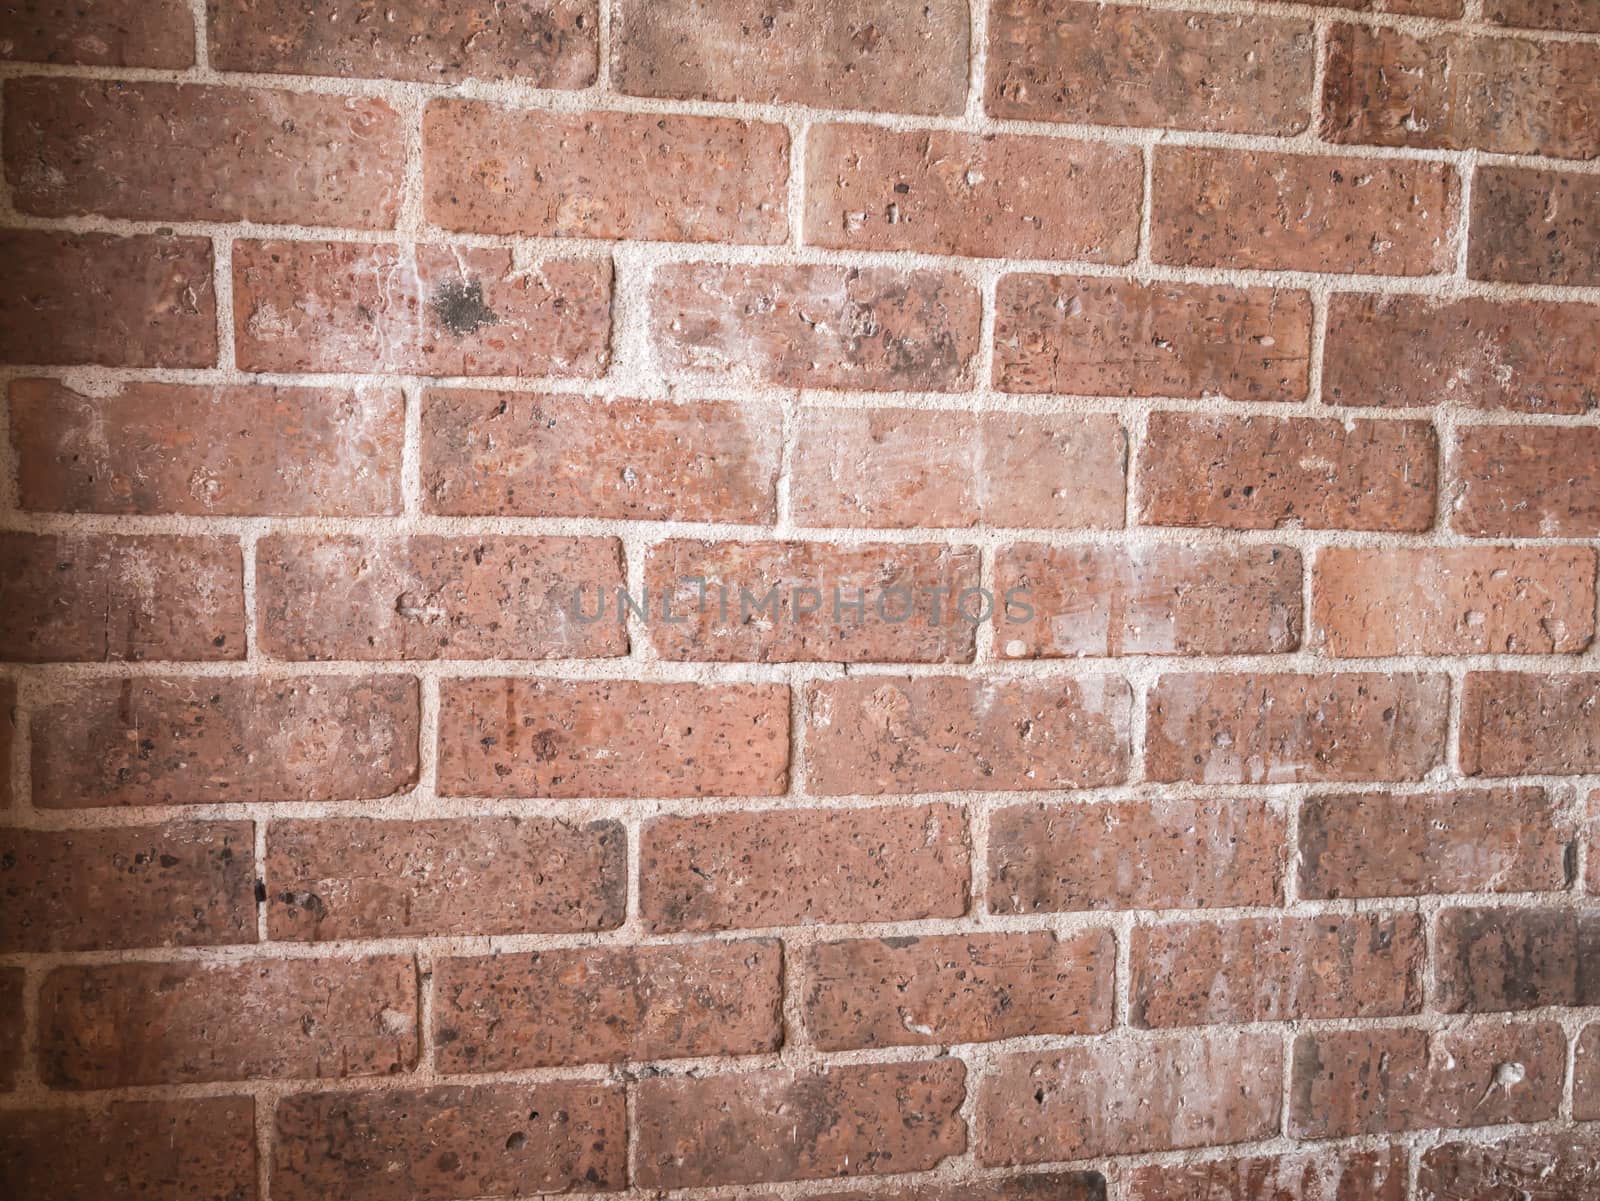 Brick Wall Background by nikky1972